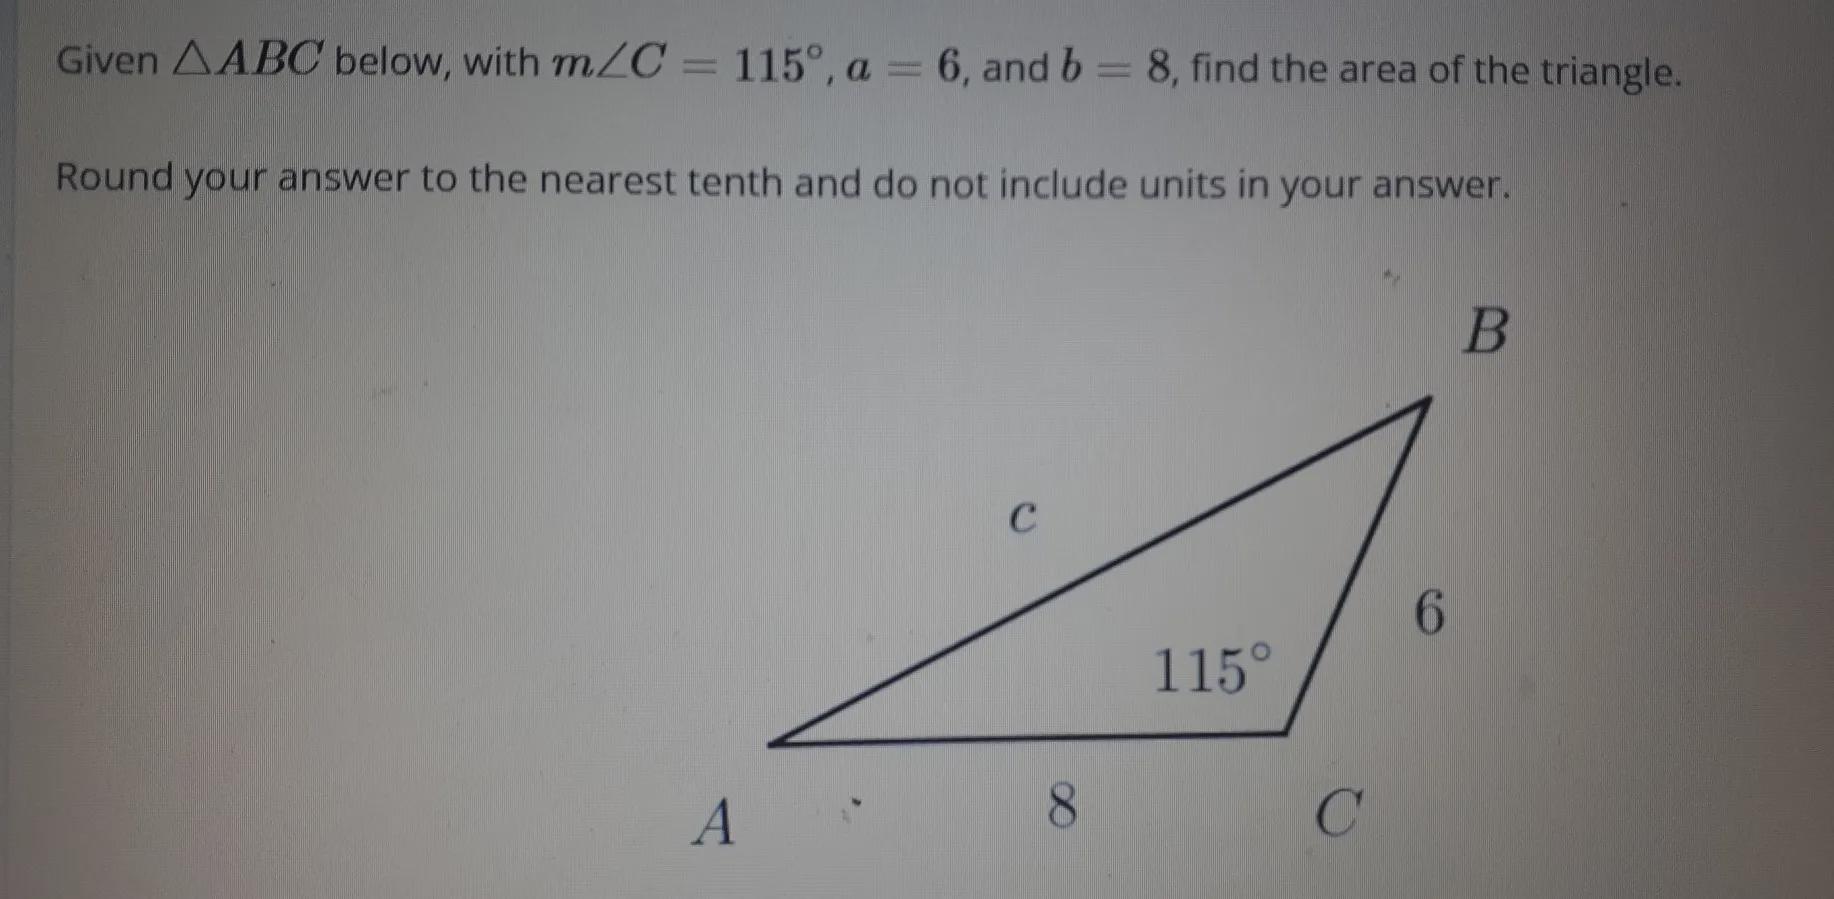 Given ABC Below, With M C = 115, A = 6, And B = 8, Find The Area Of The Triangle. Round Your Answer To